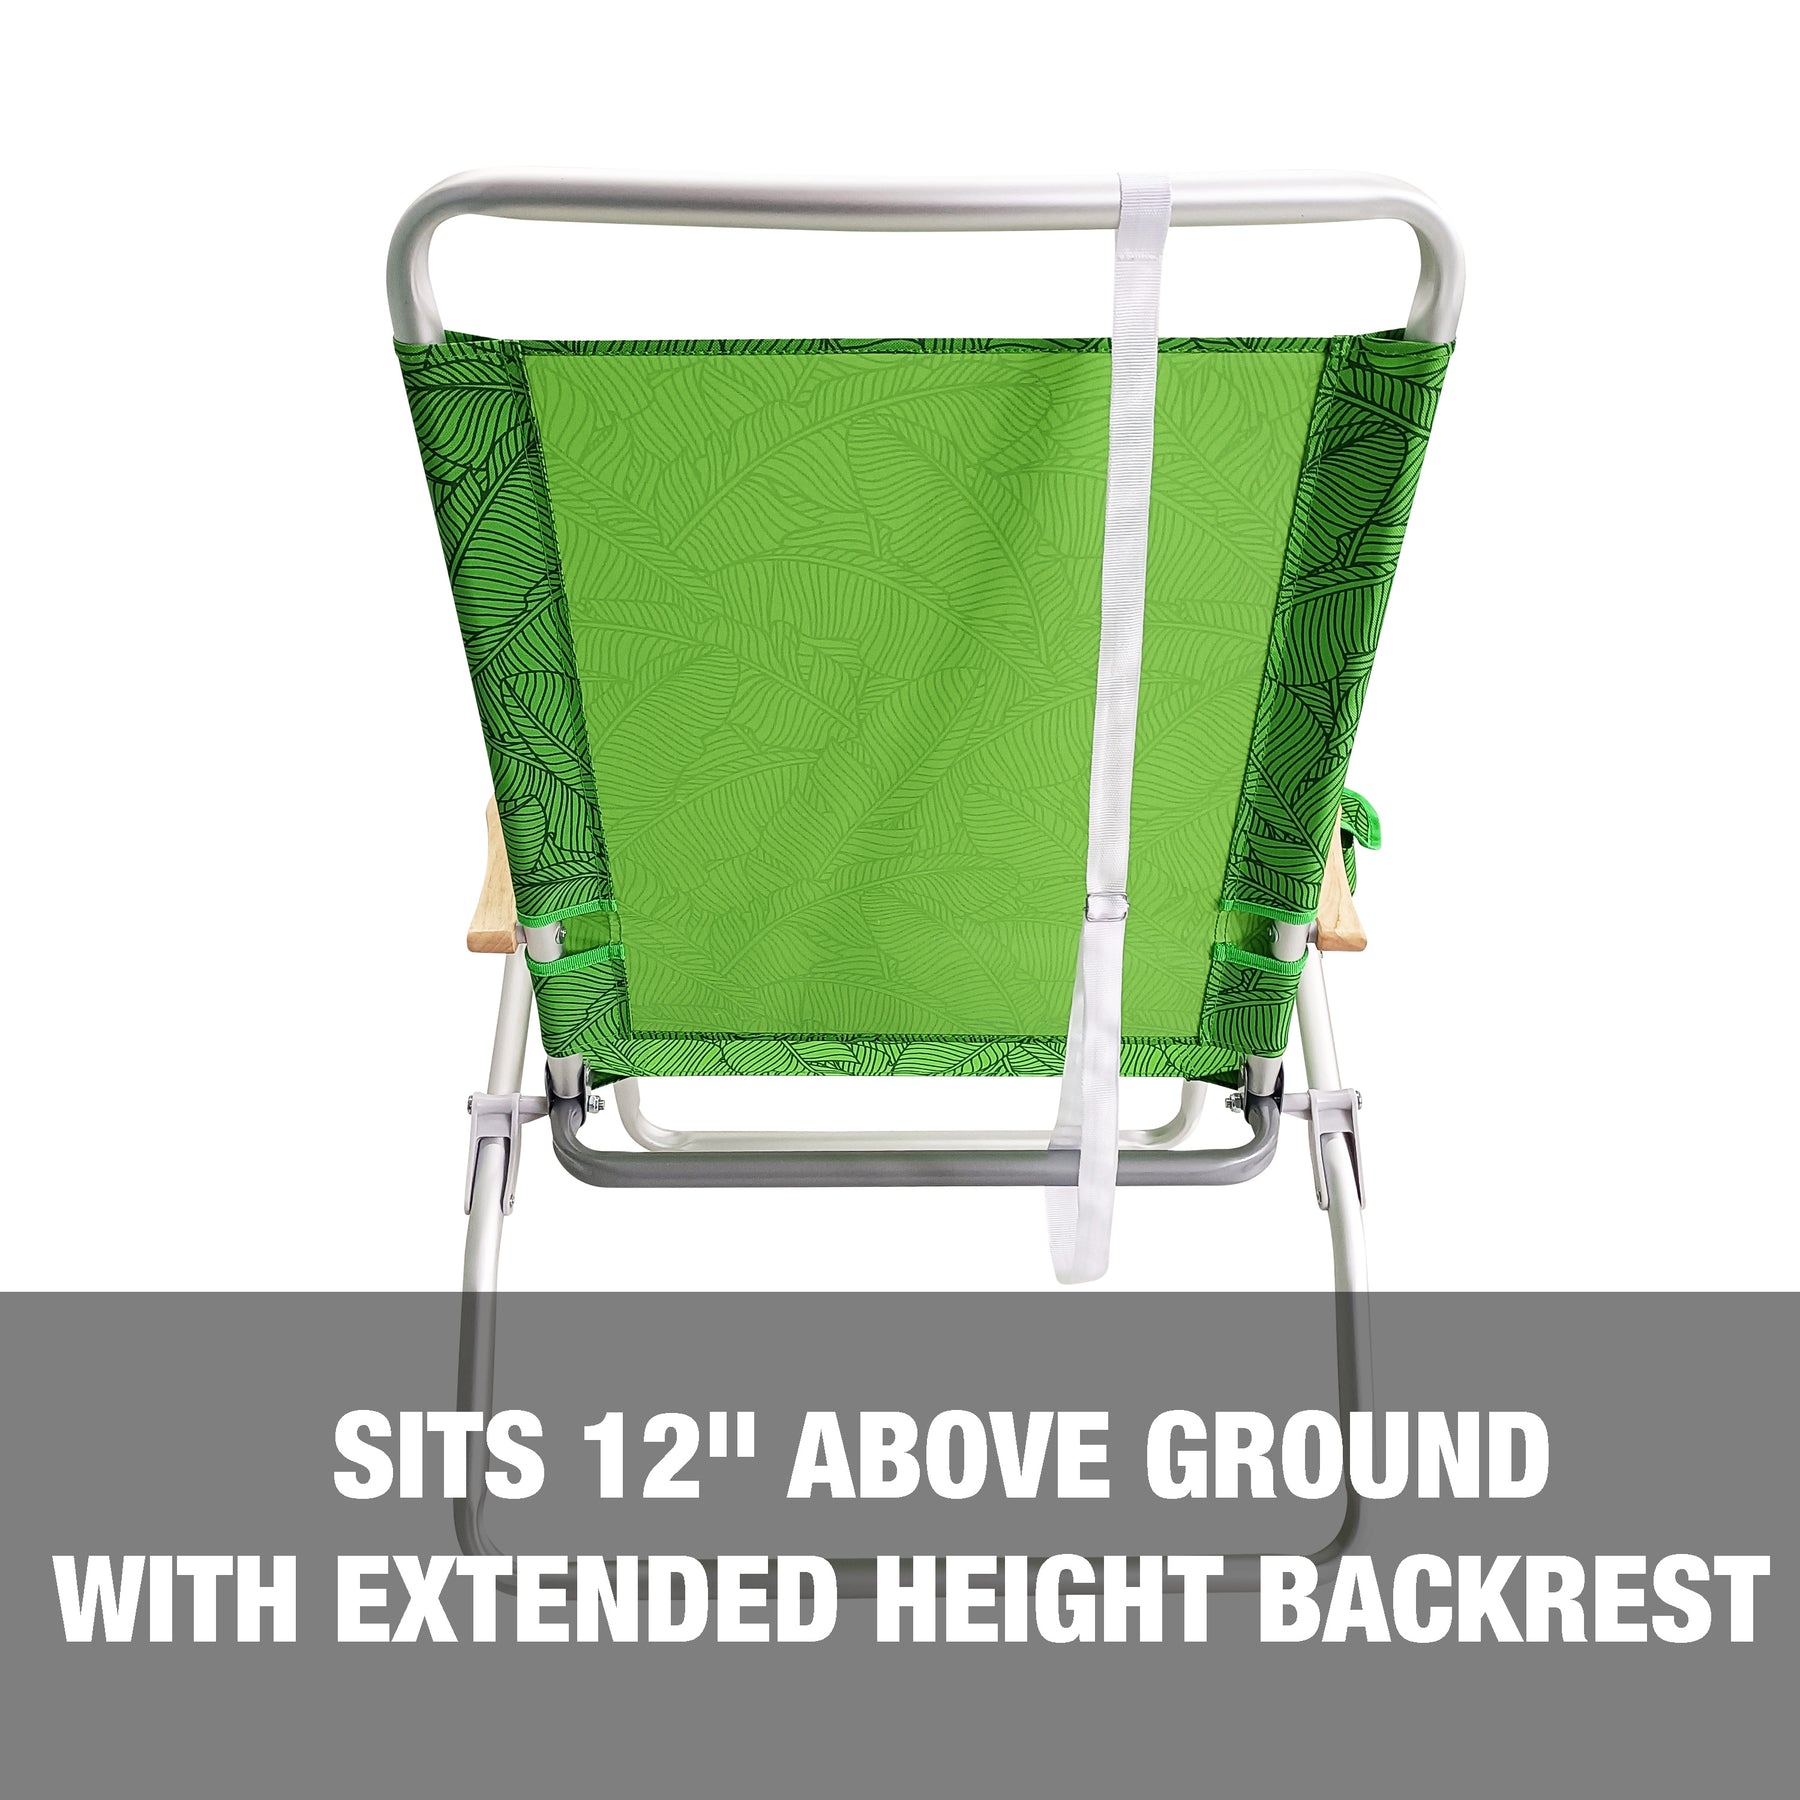 Bliss Hammocks Foldable Beach Chair site 12 inches above the ground with extended height backrest.